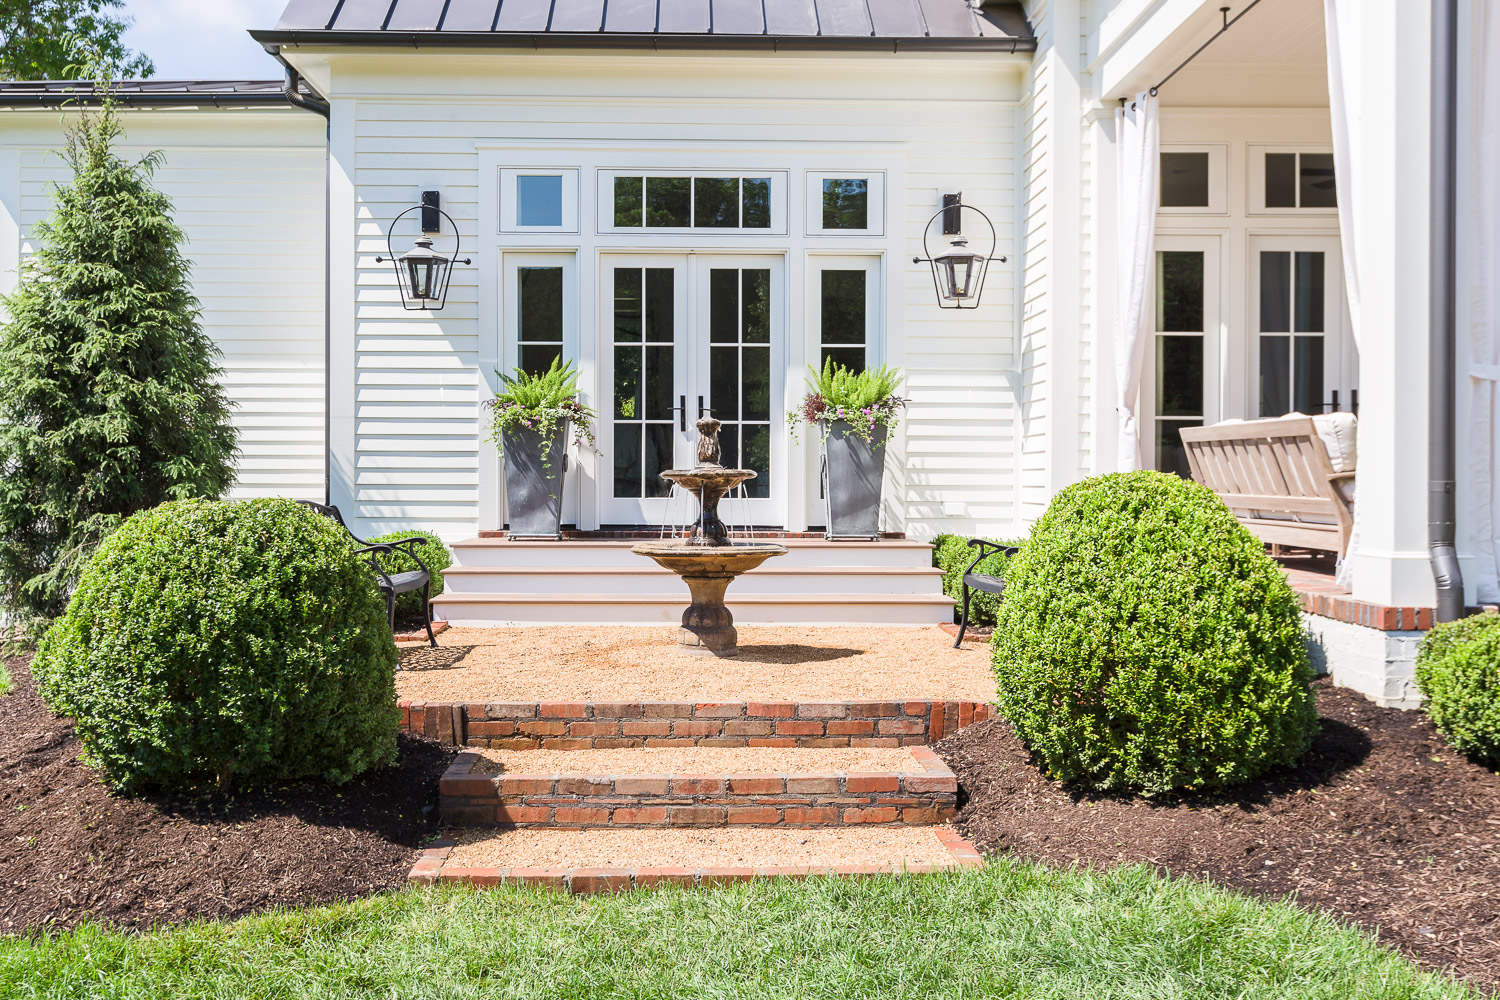 Outdoor Living at the Nashville Symphony Show House